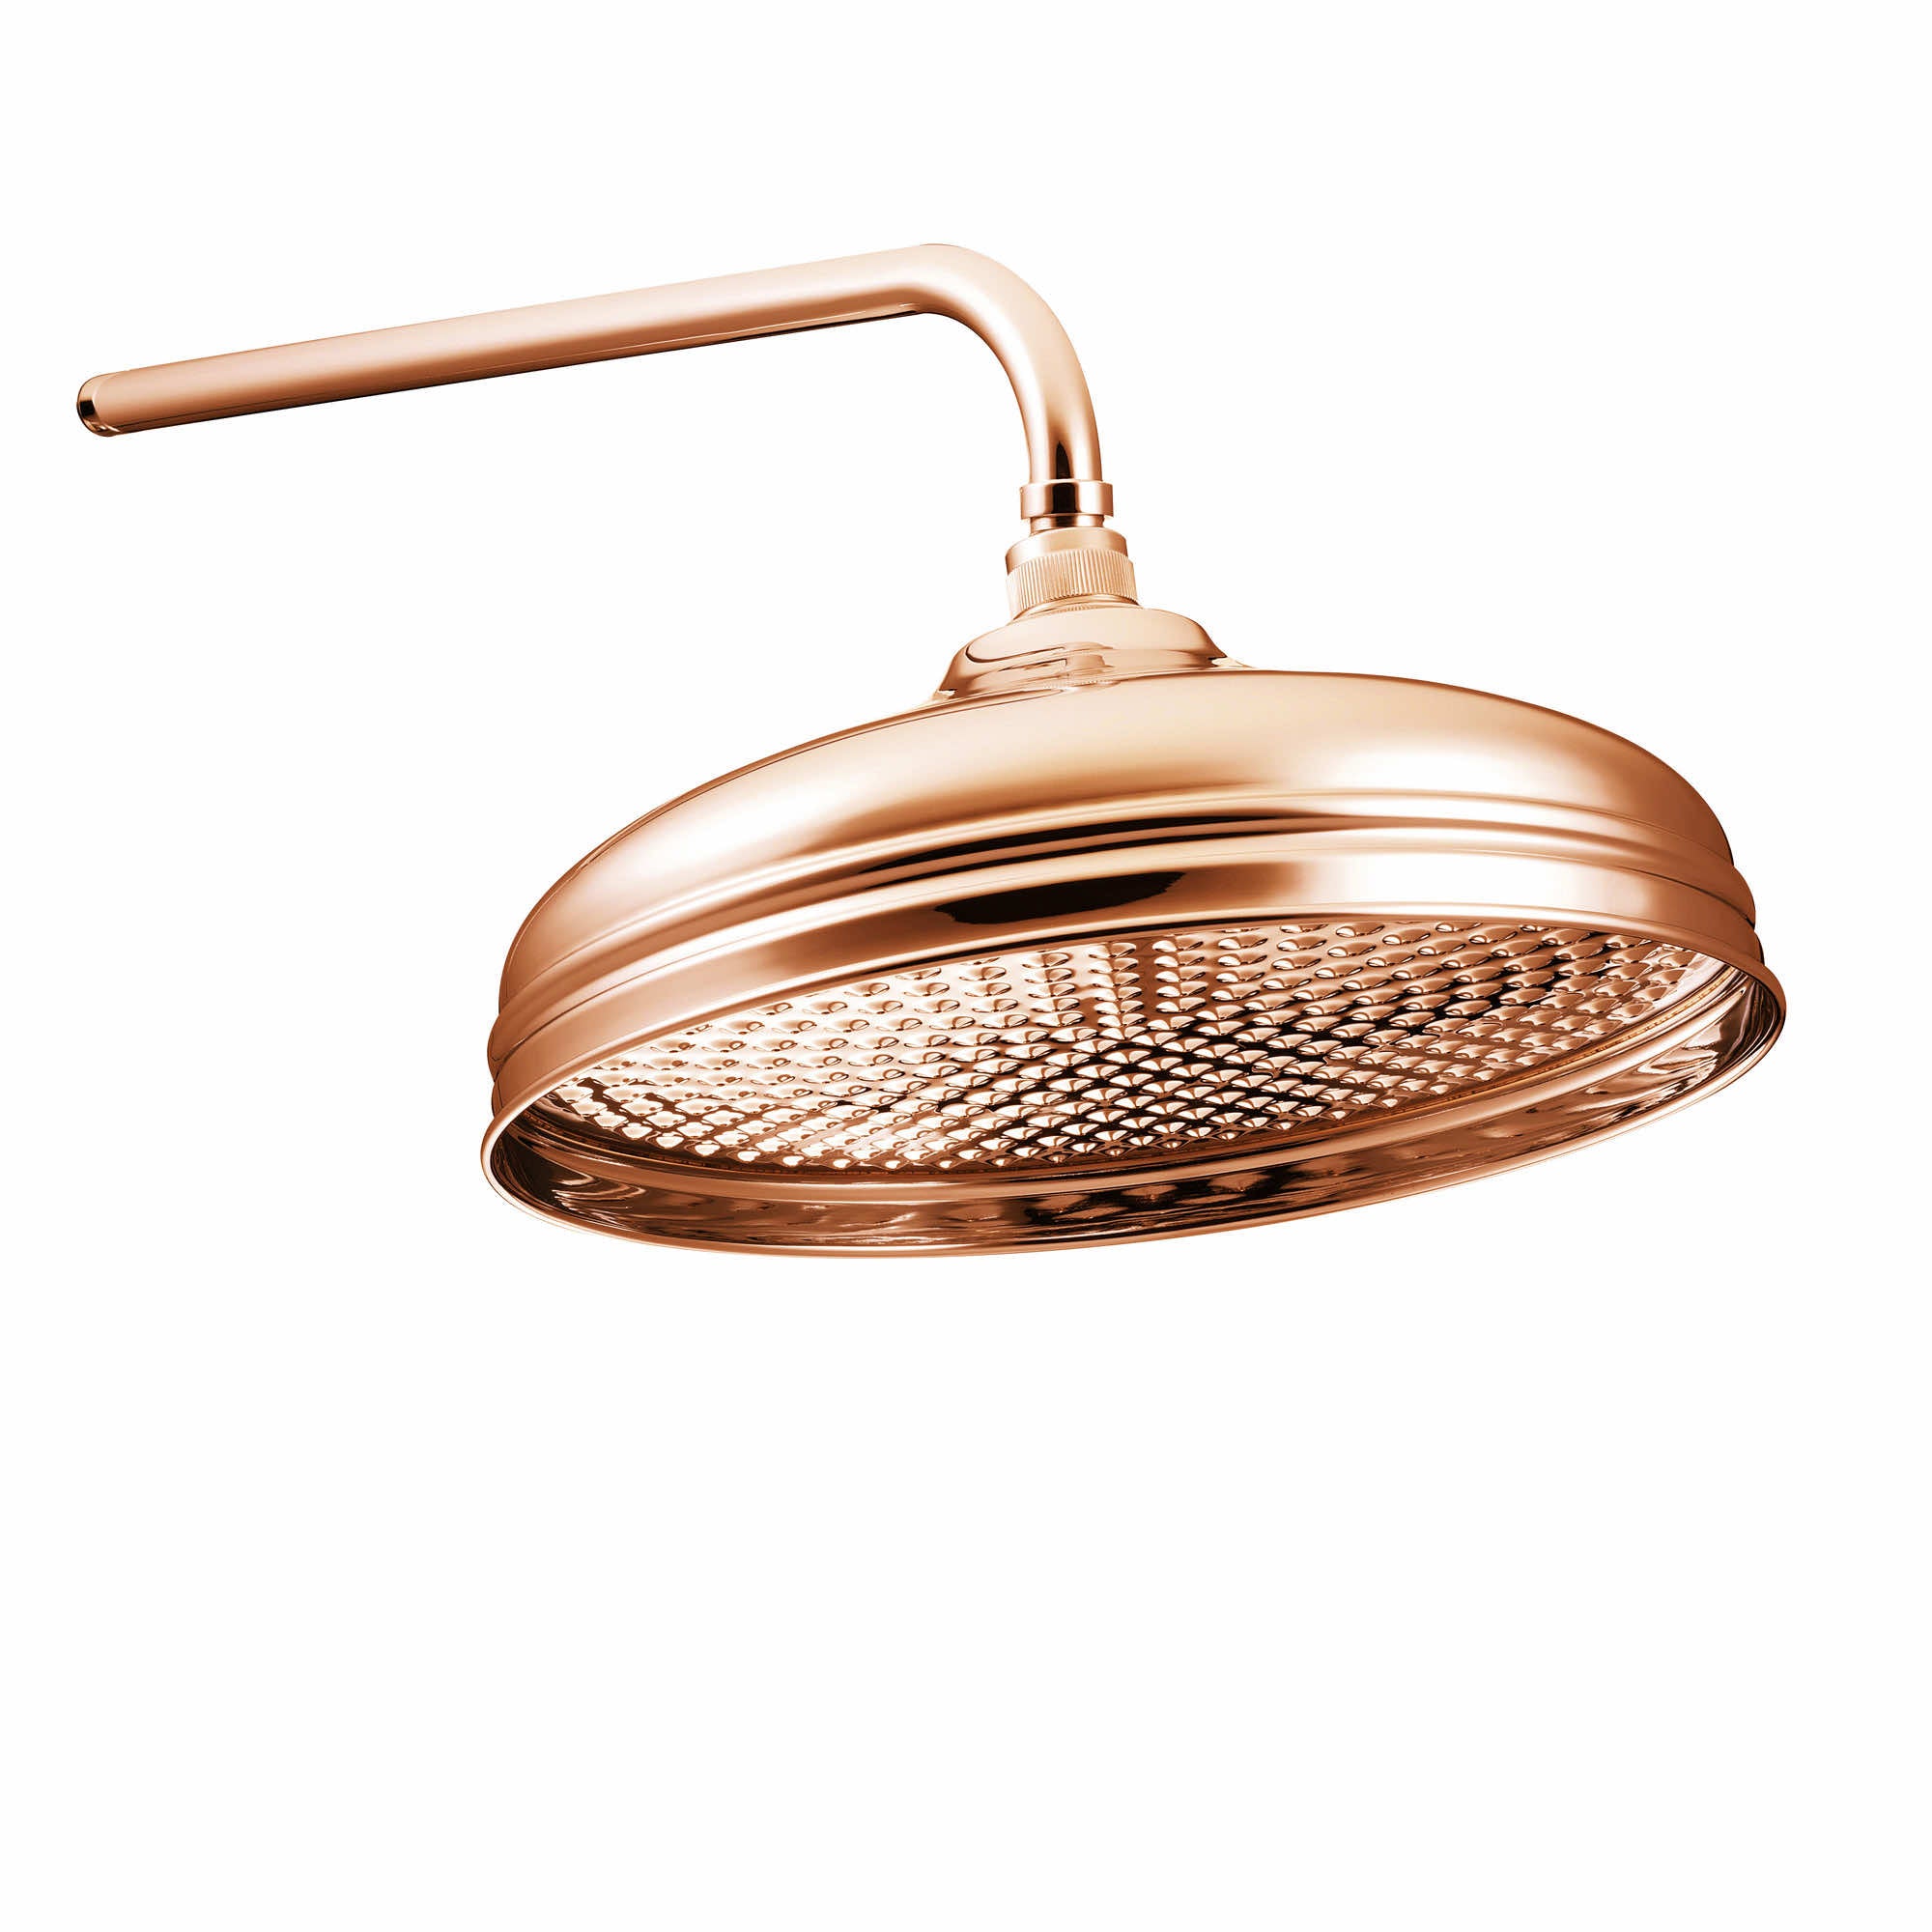 Copper Shower Head - Large Traditional Bell